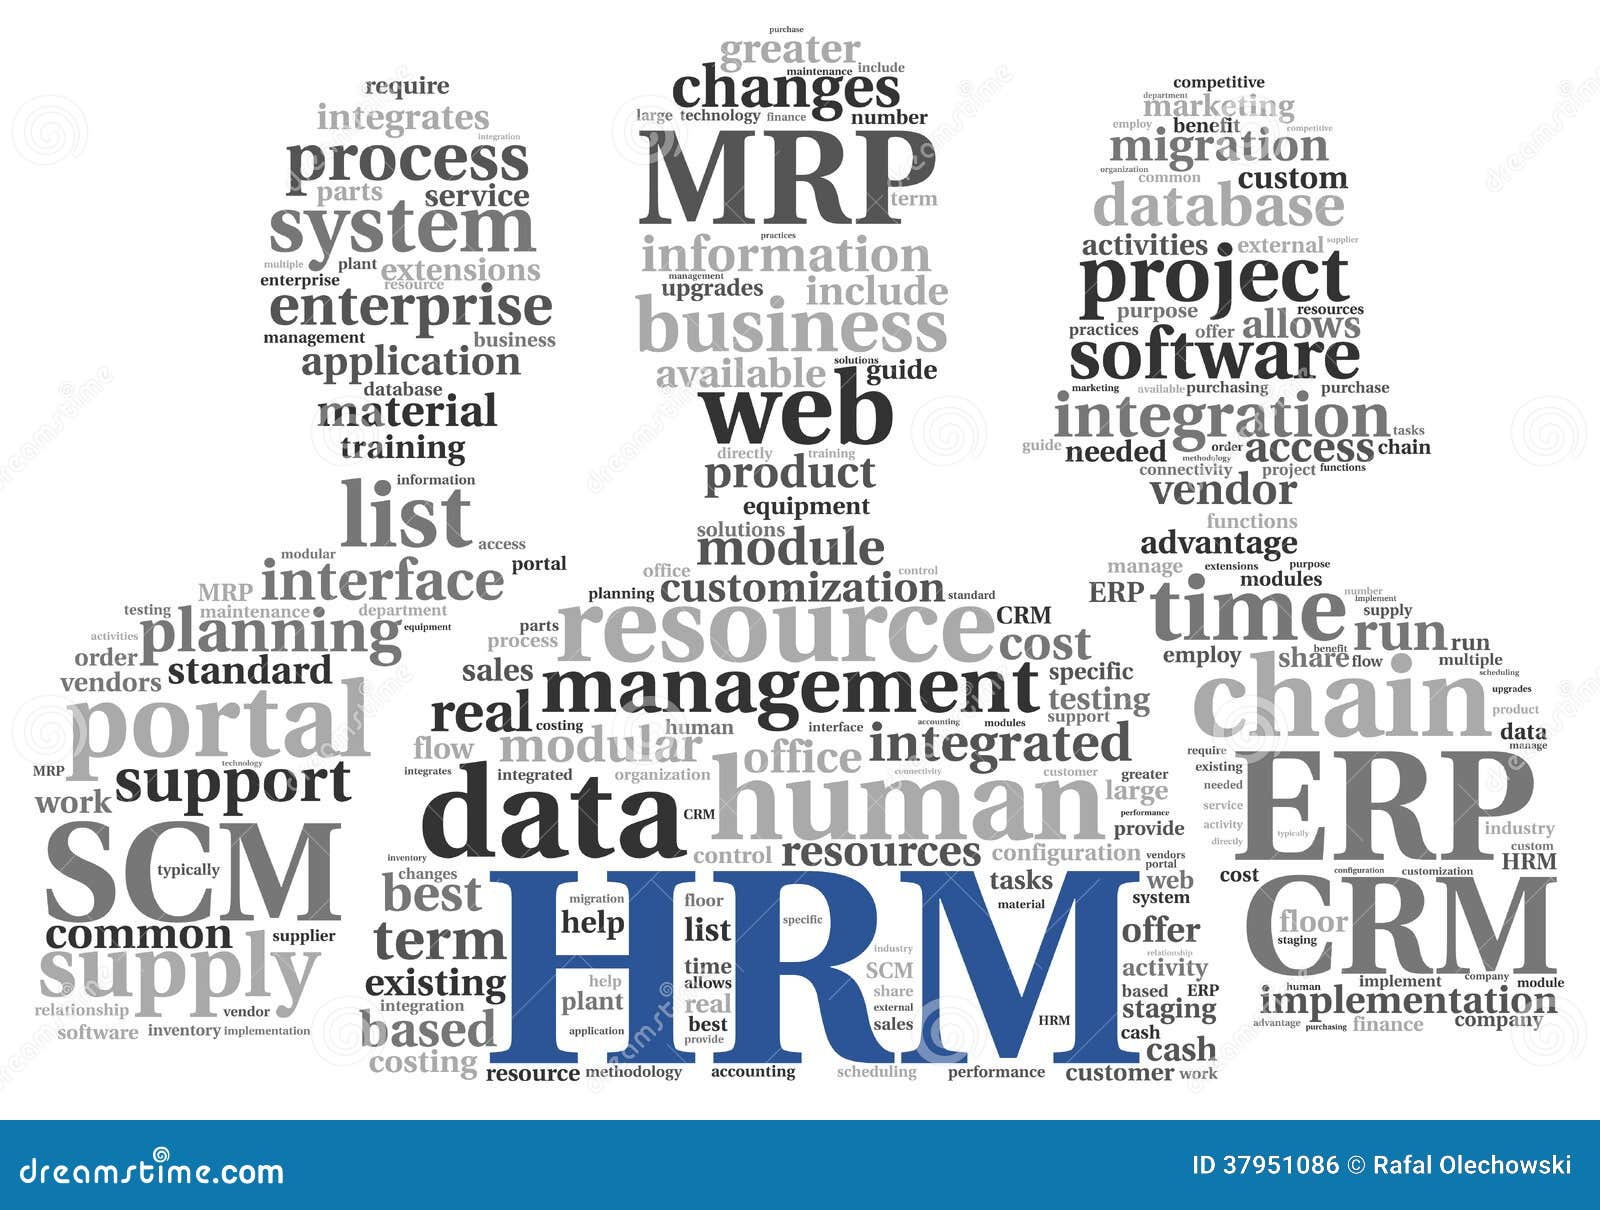 Human Resource Management (HRM) - Definition and Concept